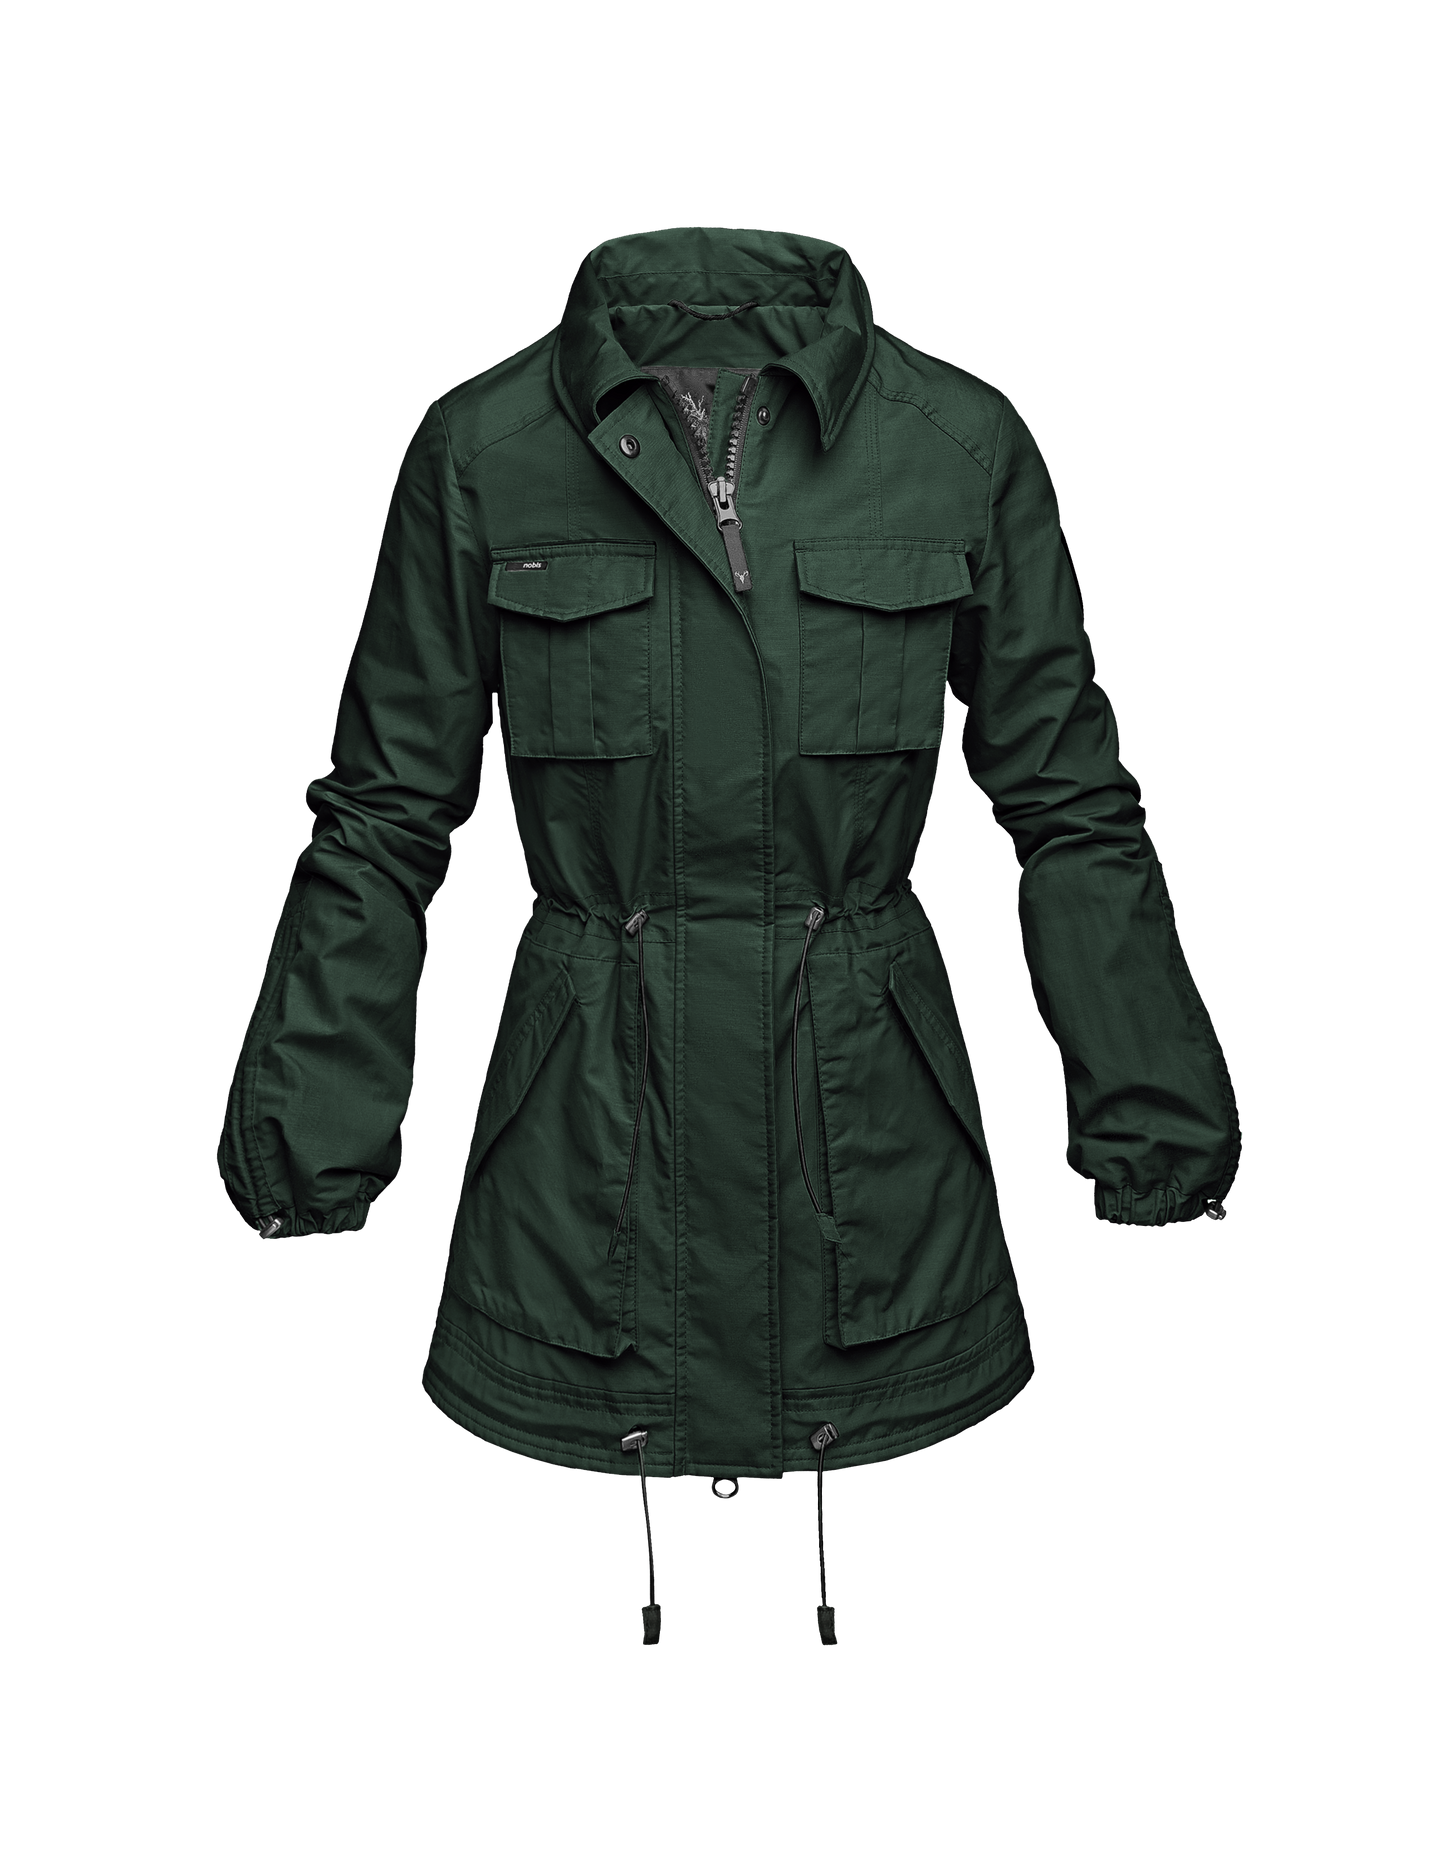 Women's hooded shirt jacket with four front pockets and adjustable waist in Olive